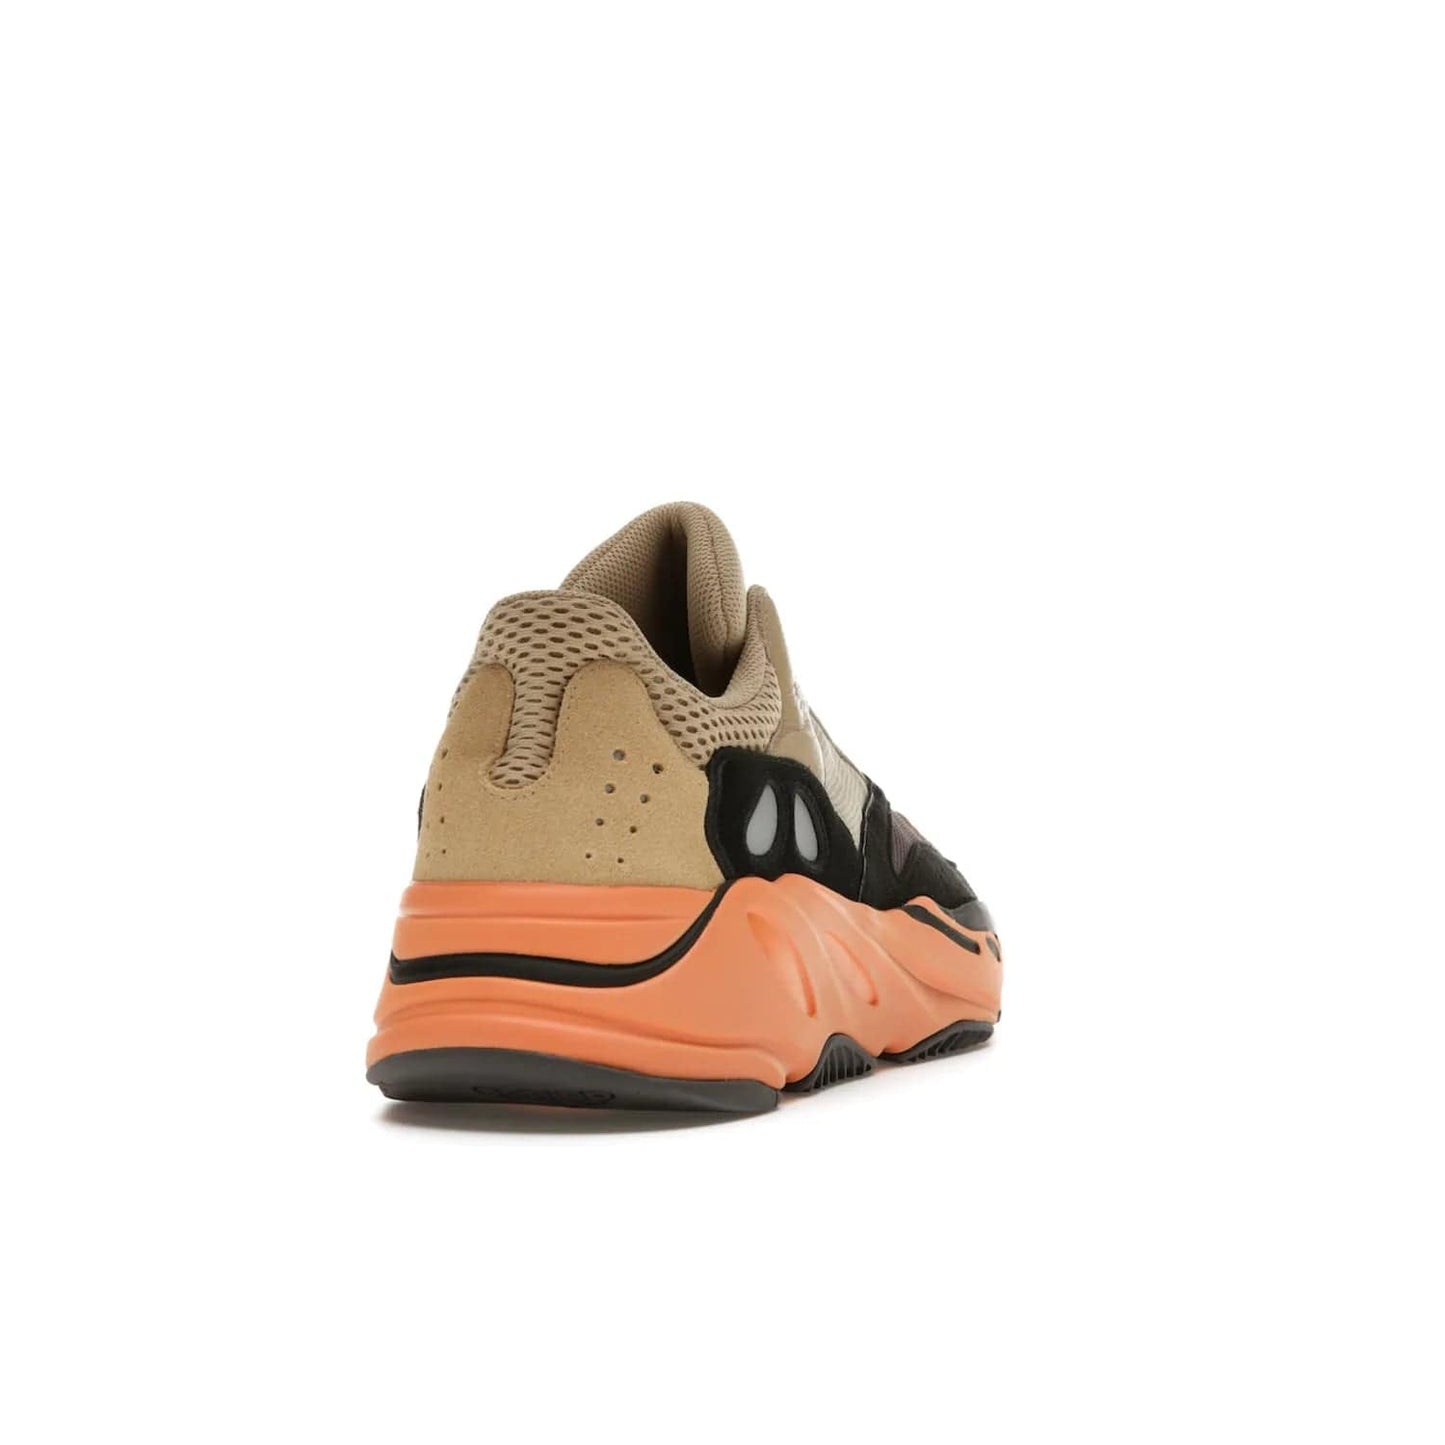 adidas Yeezy Boost 700 Enflame Amber - Image 30 - Only at www.BallersClubKickz.com - Adidas Yeezy Boost 700 Enflame Amber: Eye-catching design with pale yellow, brown, teal, and orange! Get yours in June 2021.